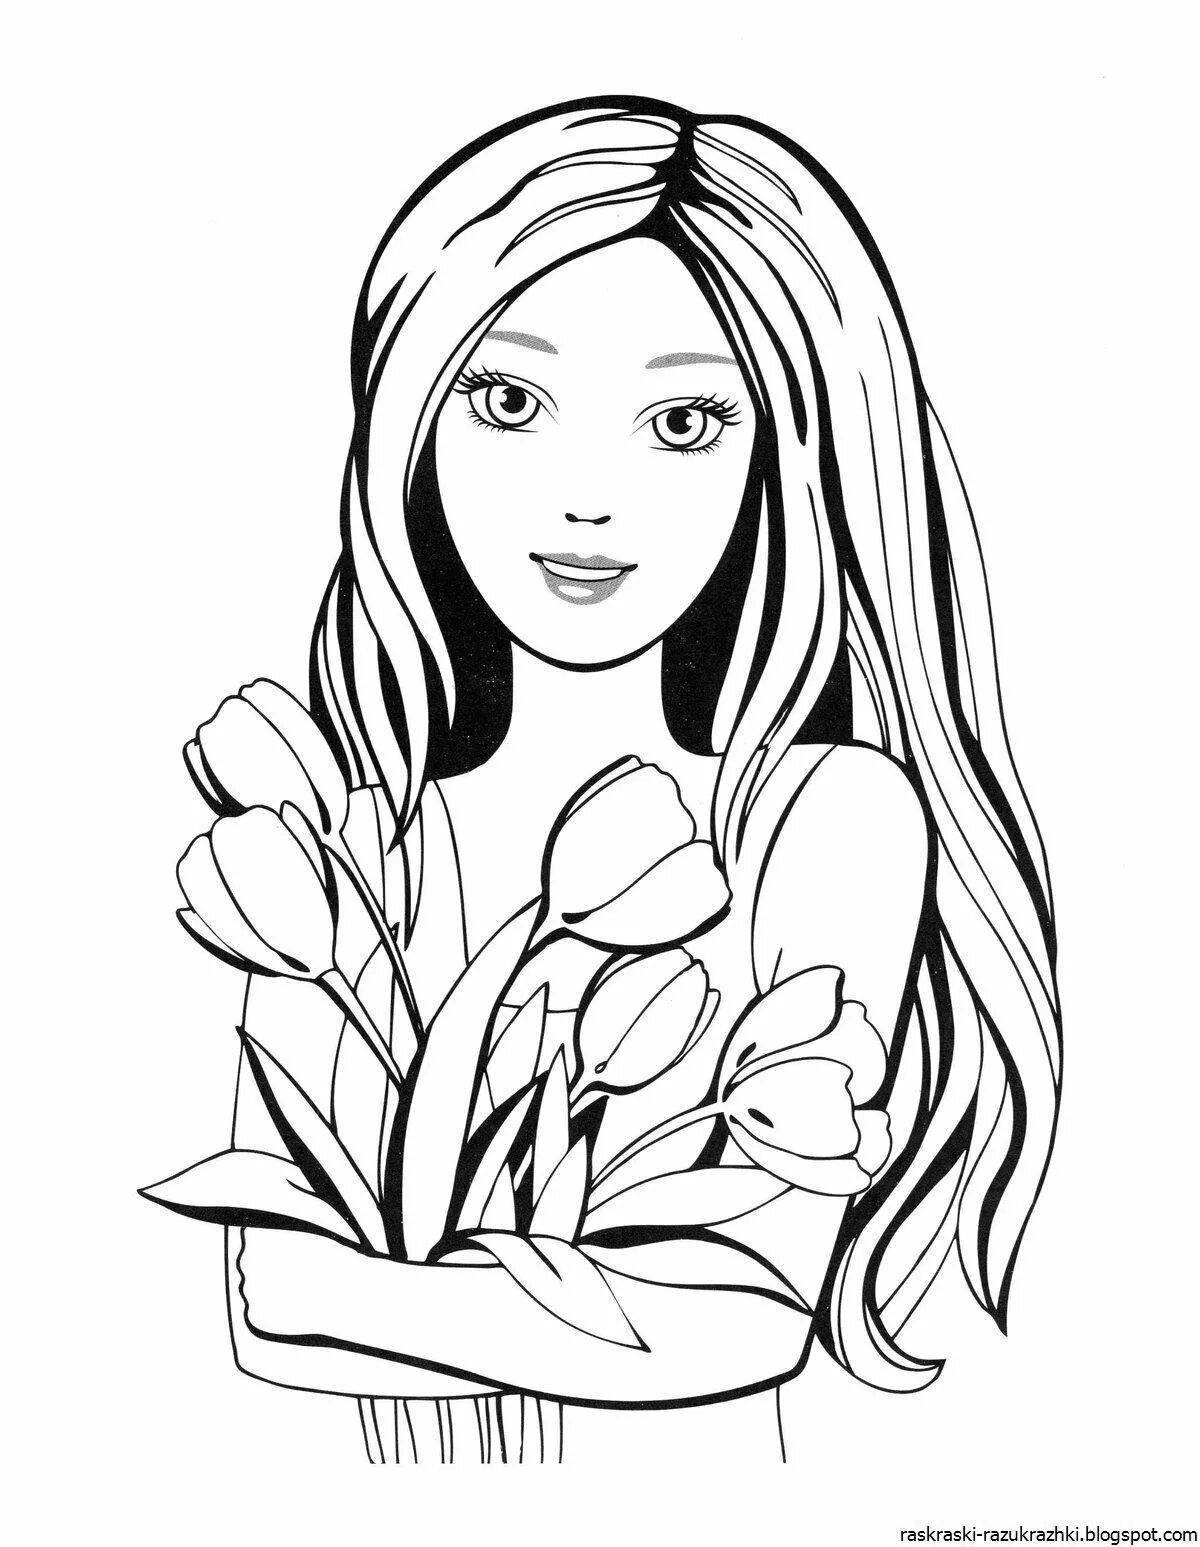 Exquisite black and white coloring book for girls